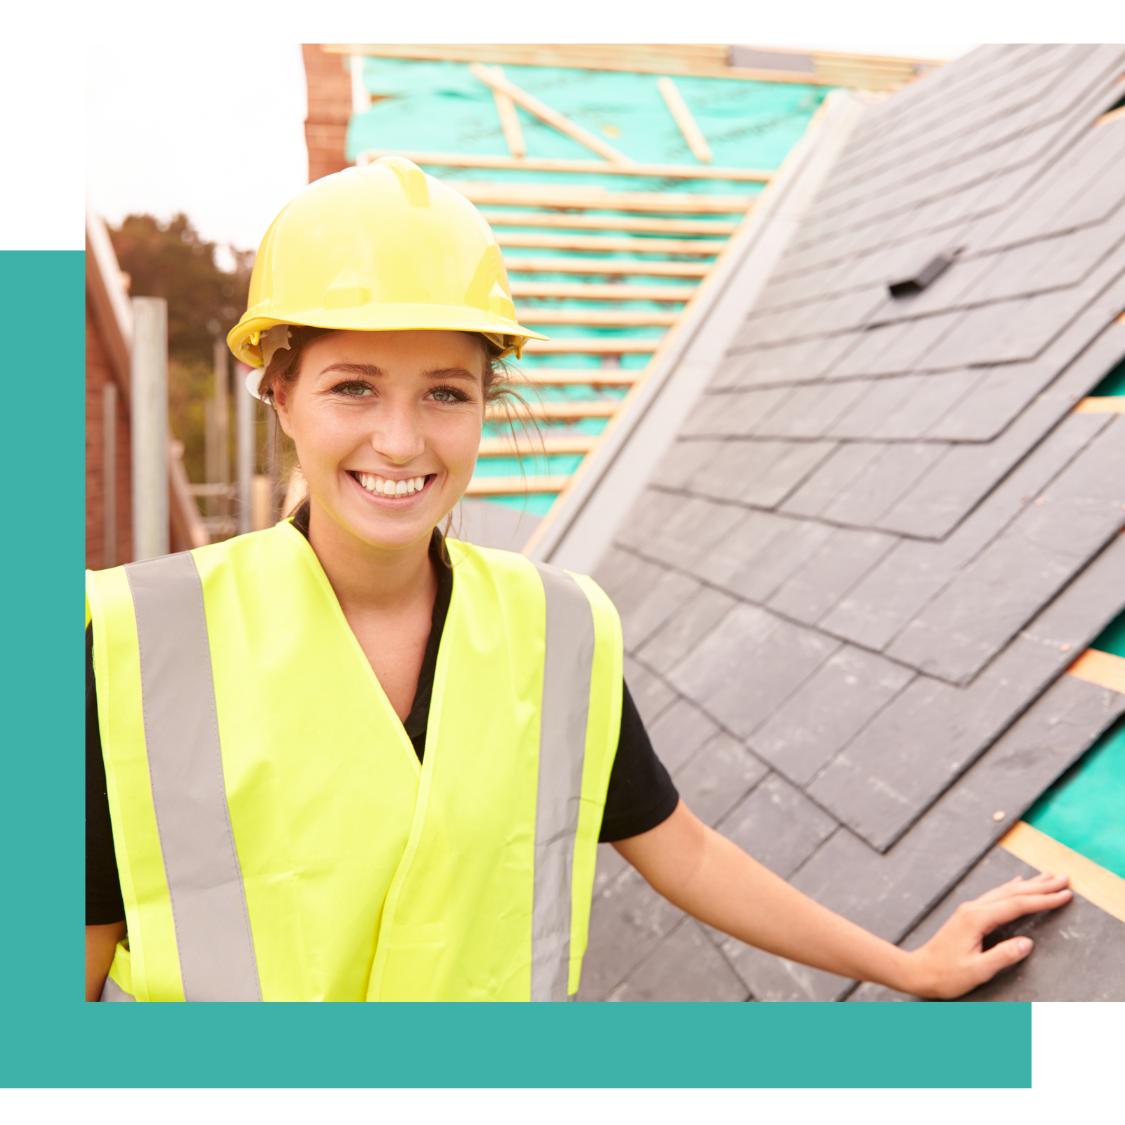 female construction working standing on roof smiling for photo